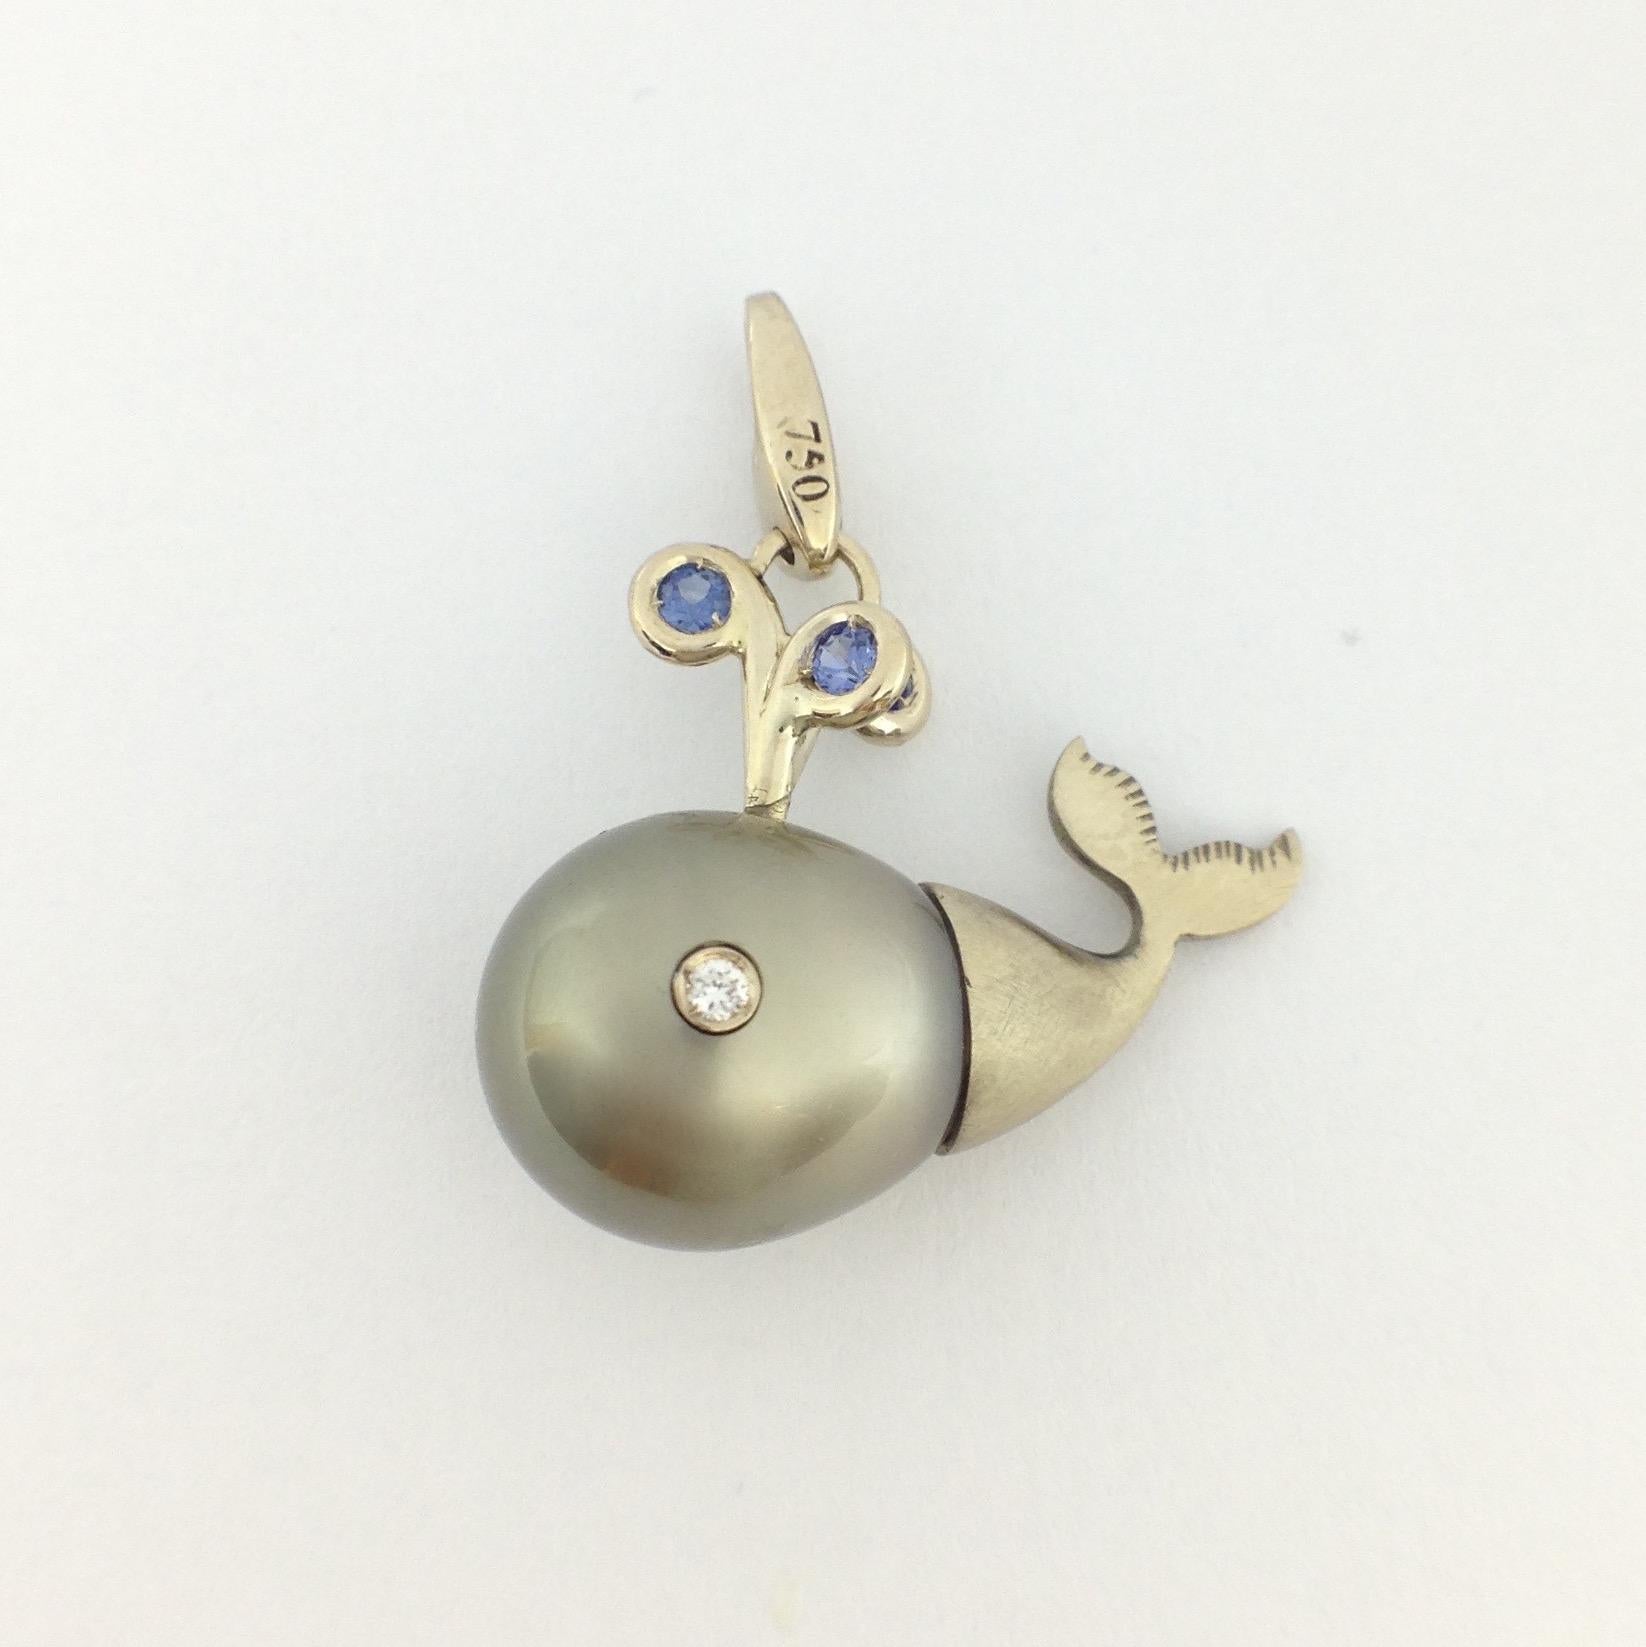 Petronilla Diamond Blue Sapphire Pearl 18Kt Gold Whale Pendant/Necklace or Charm 5